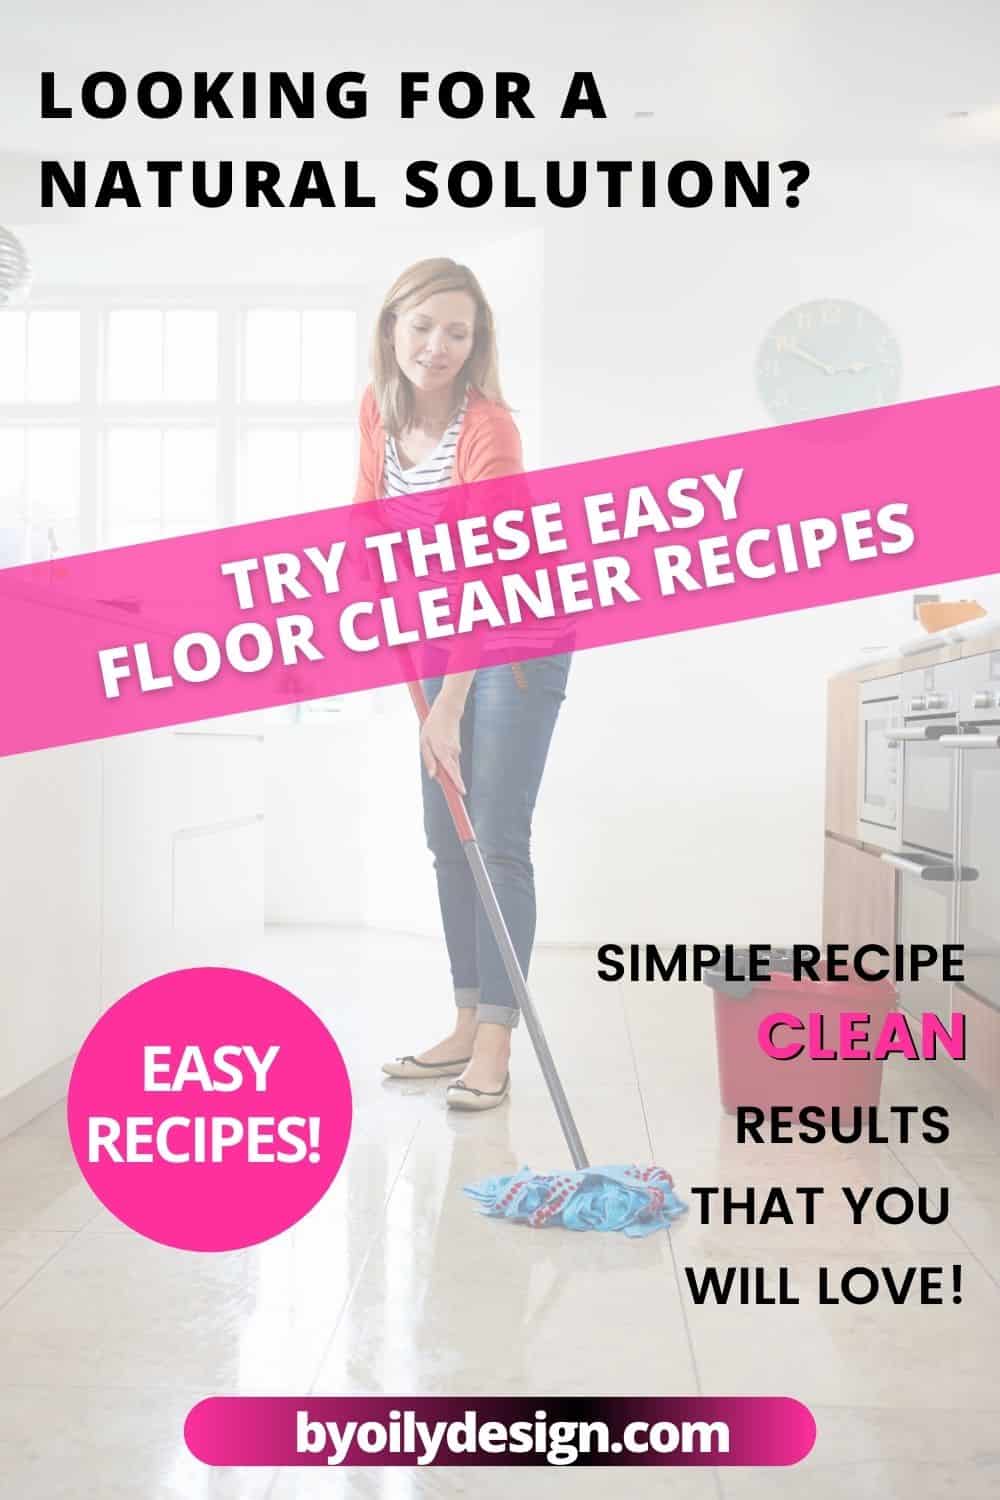 How To Make Homemade Floor Cleaners, Diy Tile Floor Cleaner With Essential Oils